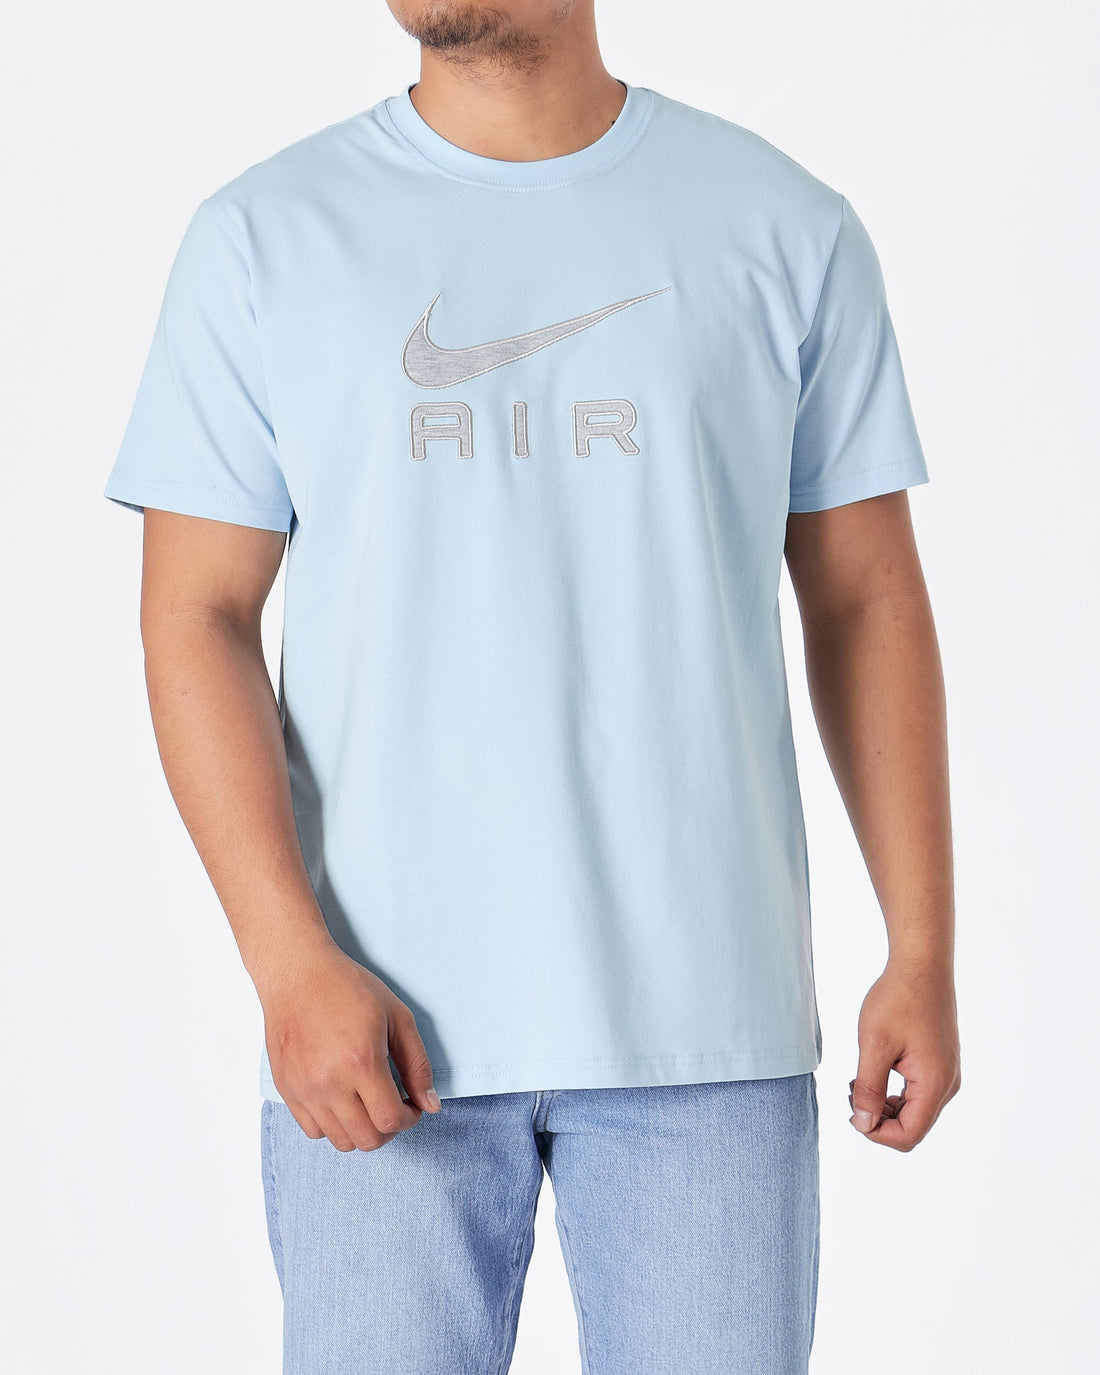 MOI OUTFIT-NIK Air Embroidered Men Blue T-Shirt 16.90